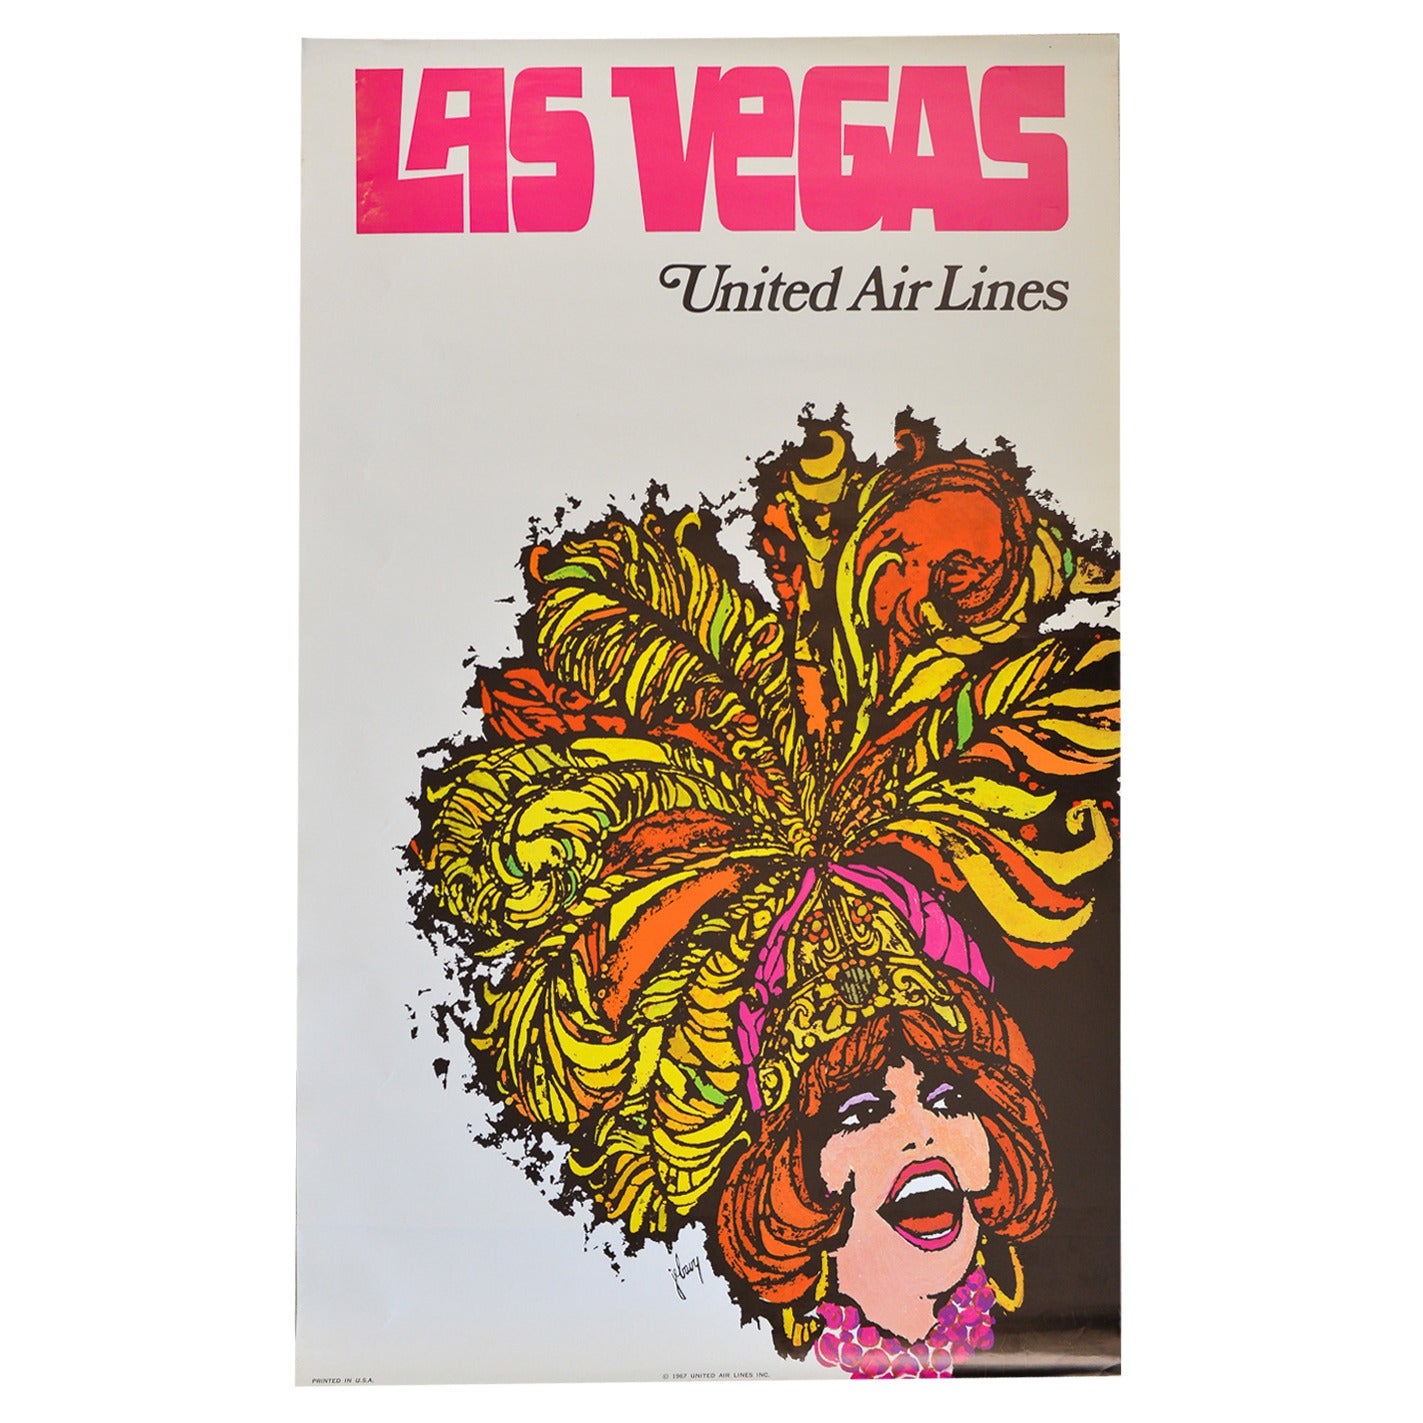 Vintage United Airlines Travel Poster for Las Vegas by Jebary